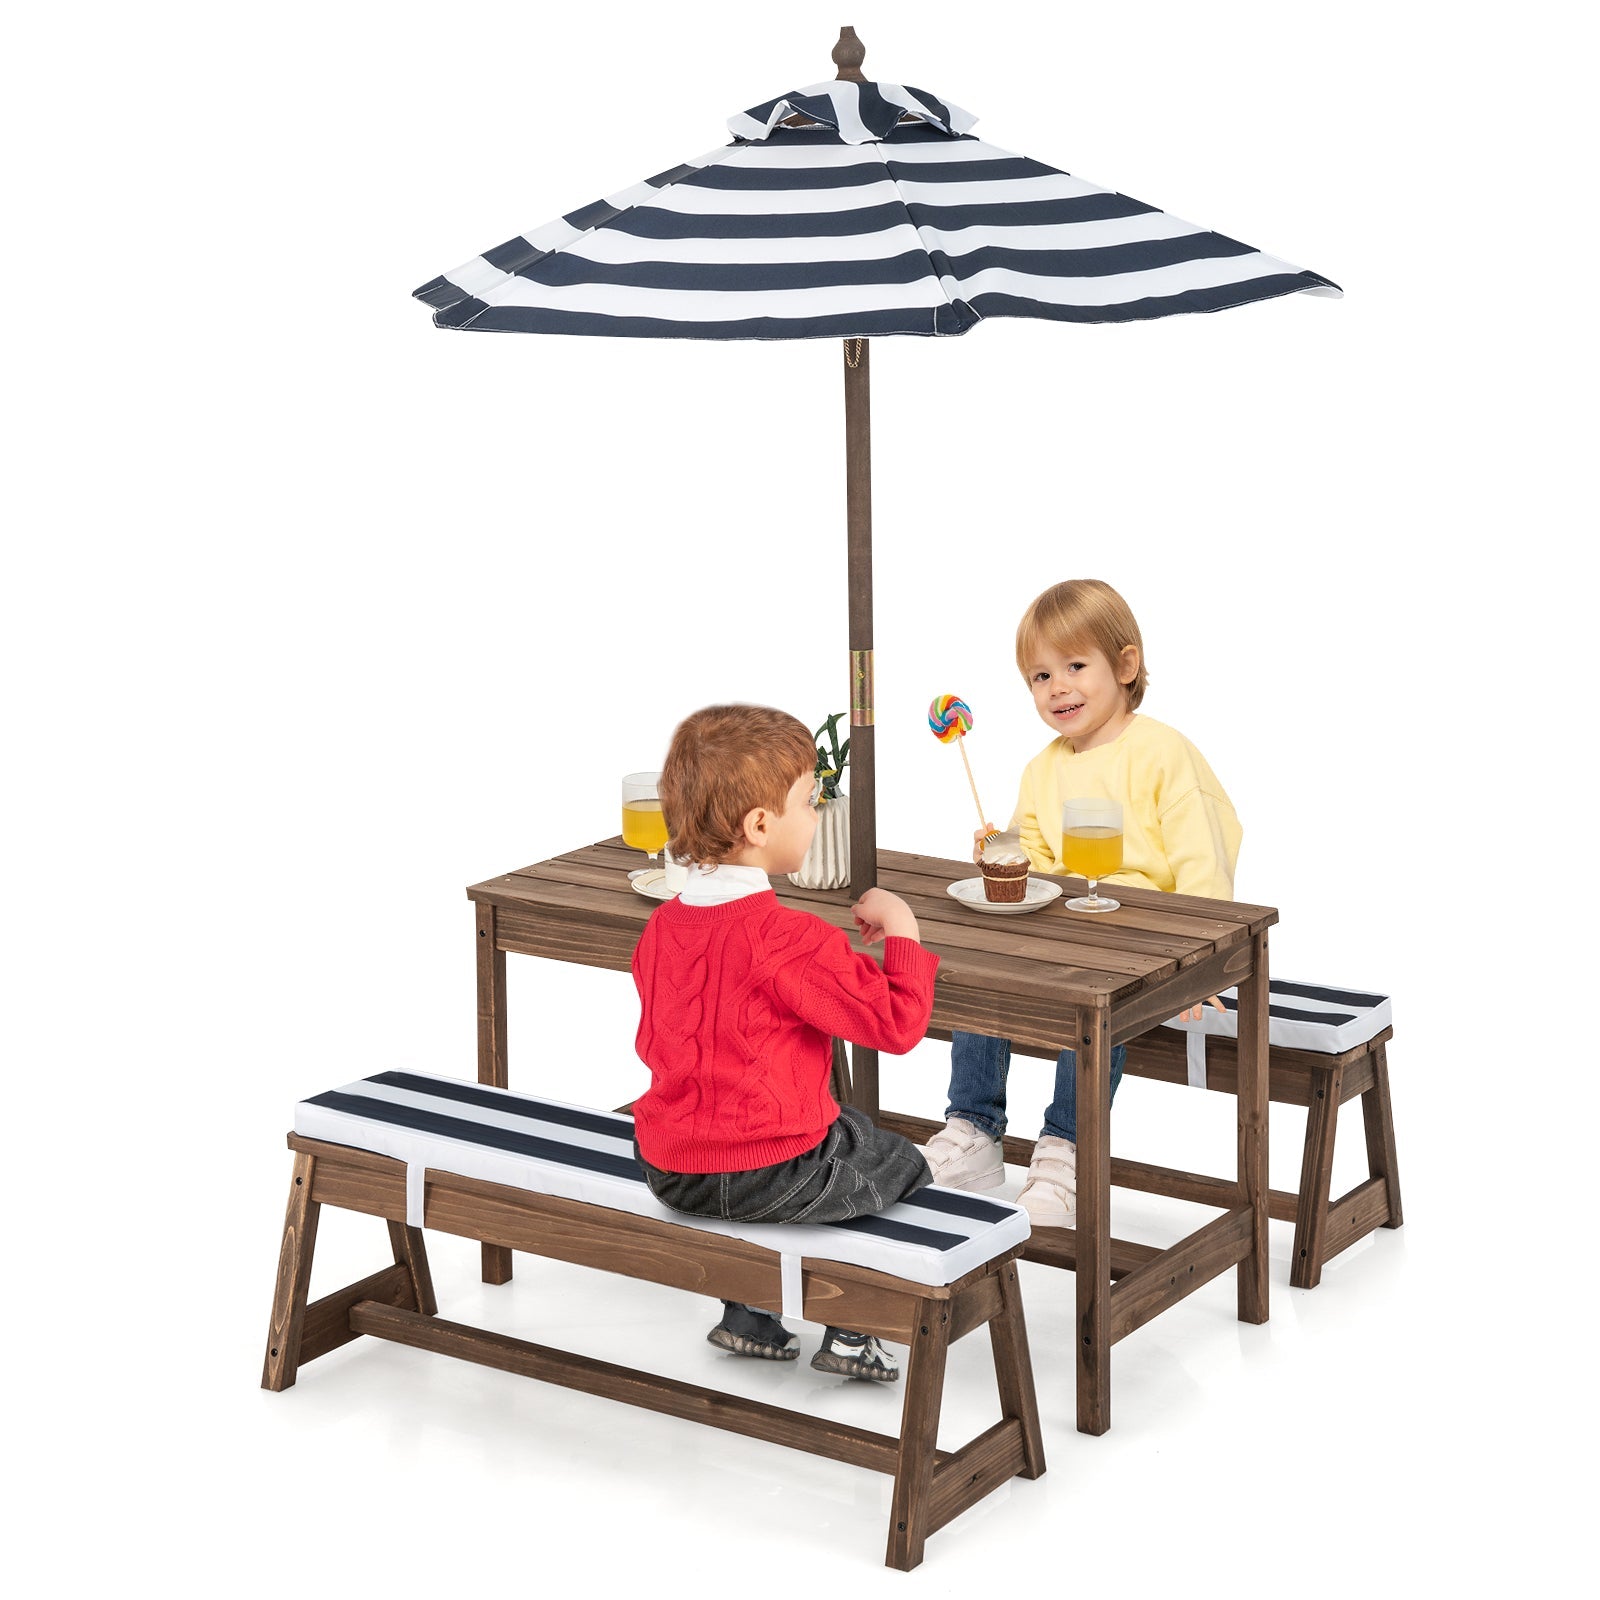 Children's Playful Patio: Table, Bench, Umbrella & Cushions - Happy Times